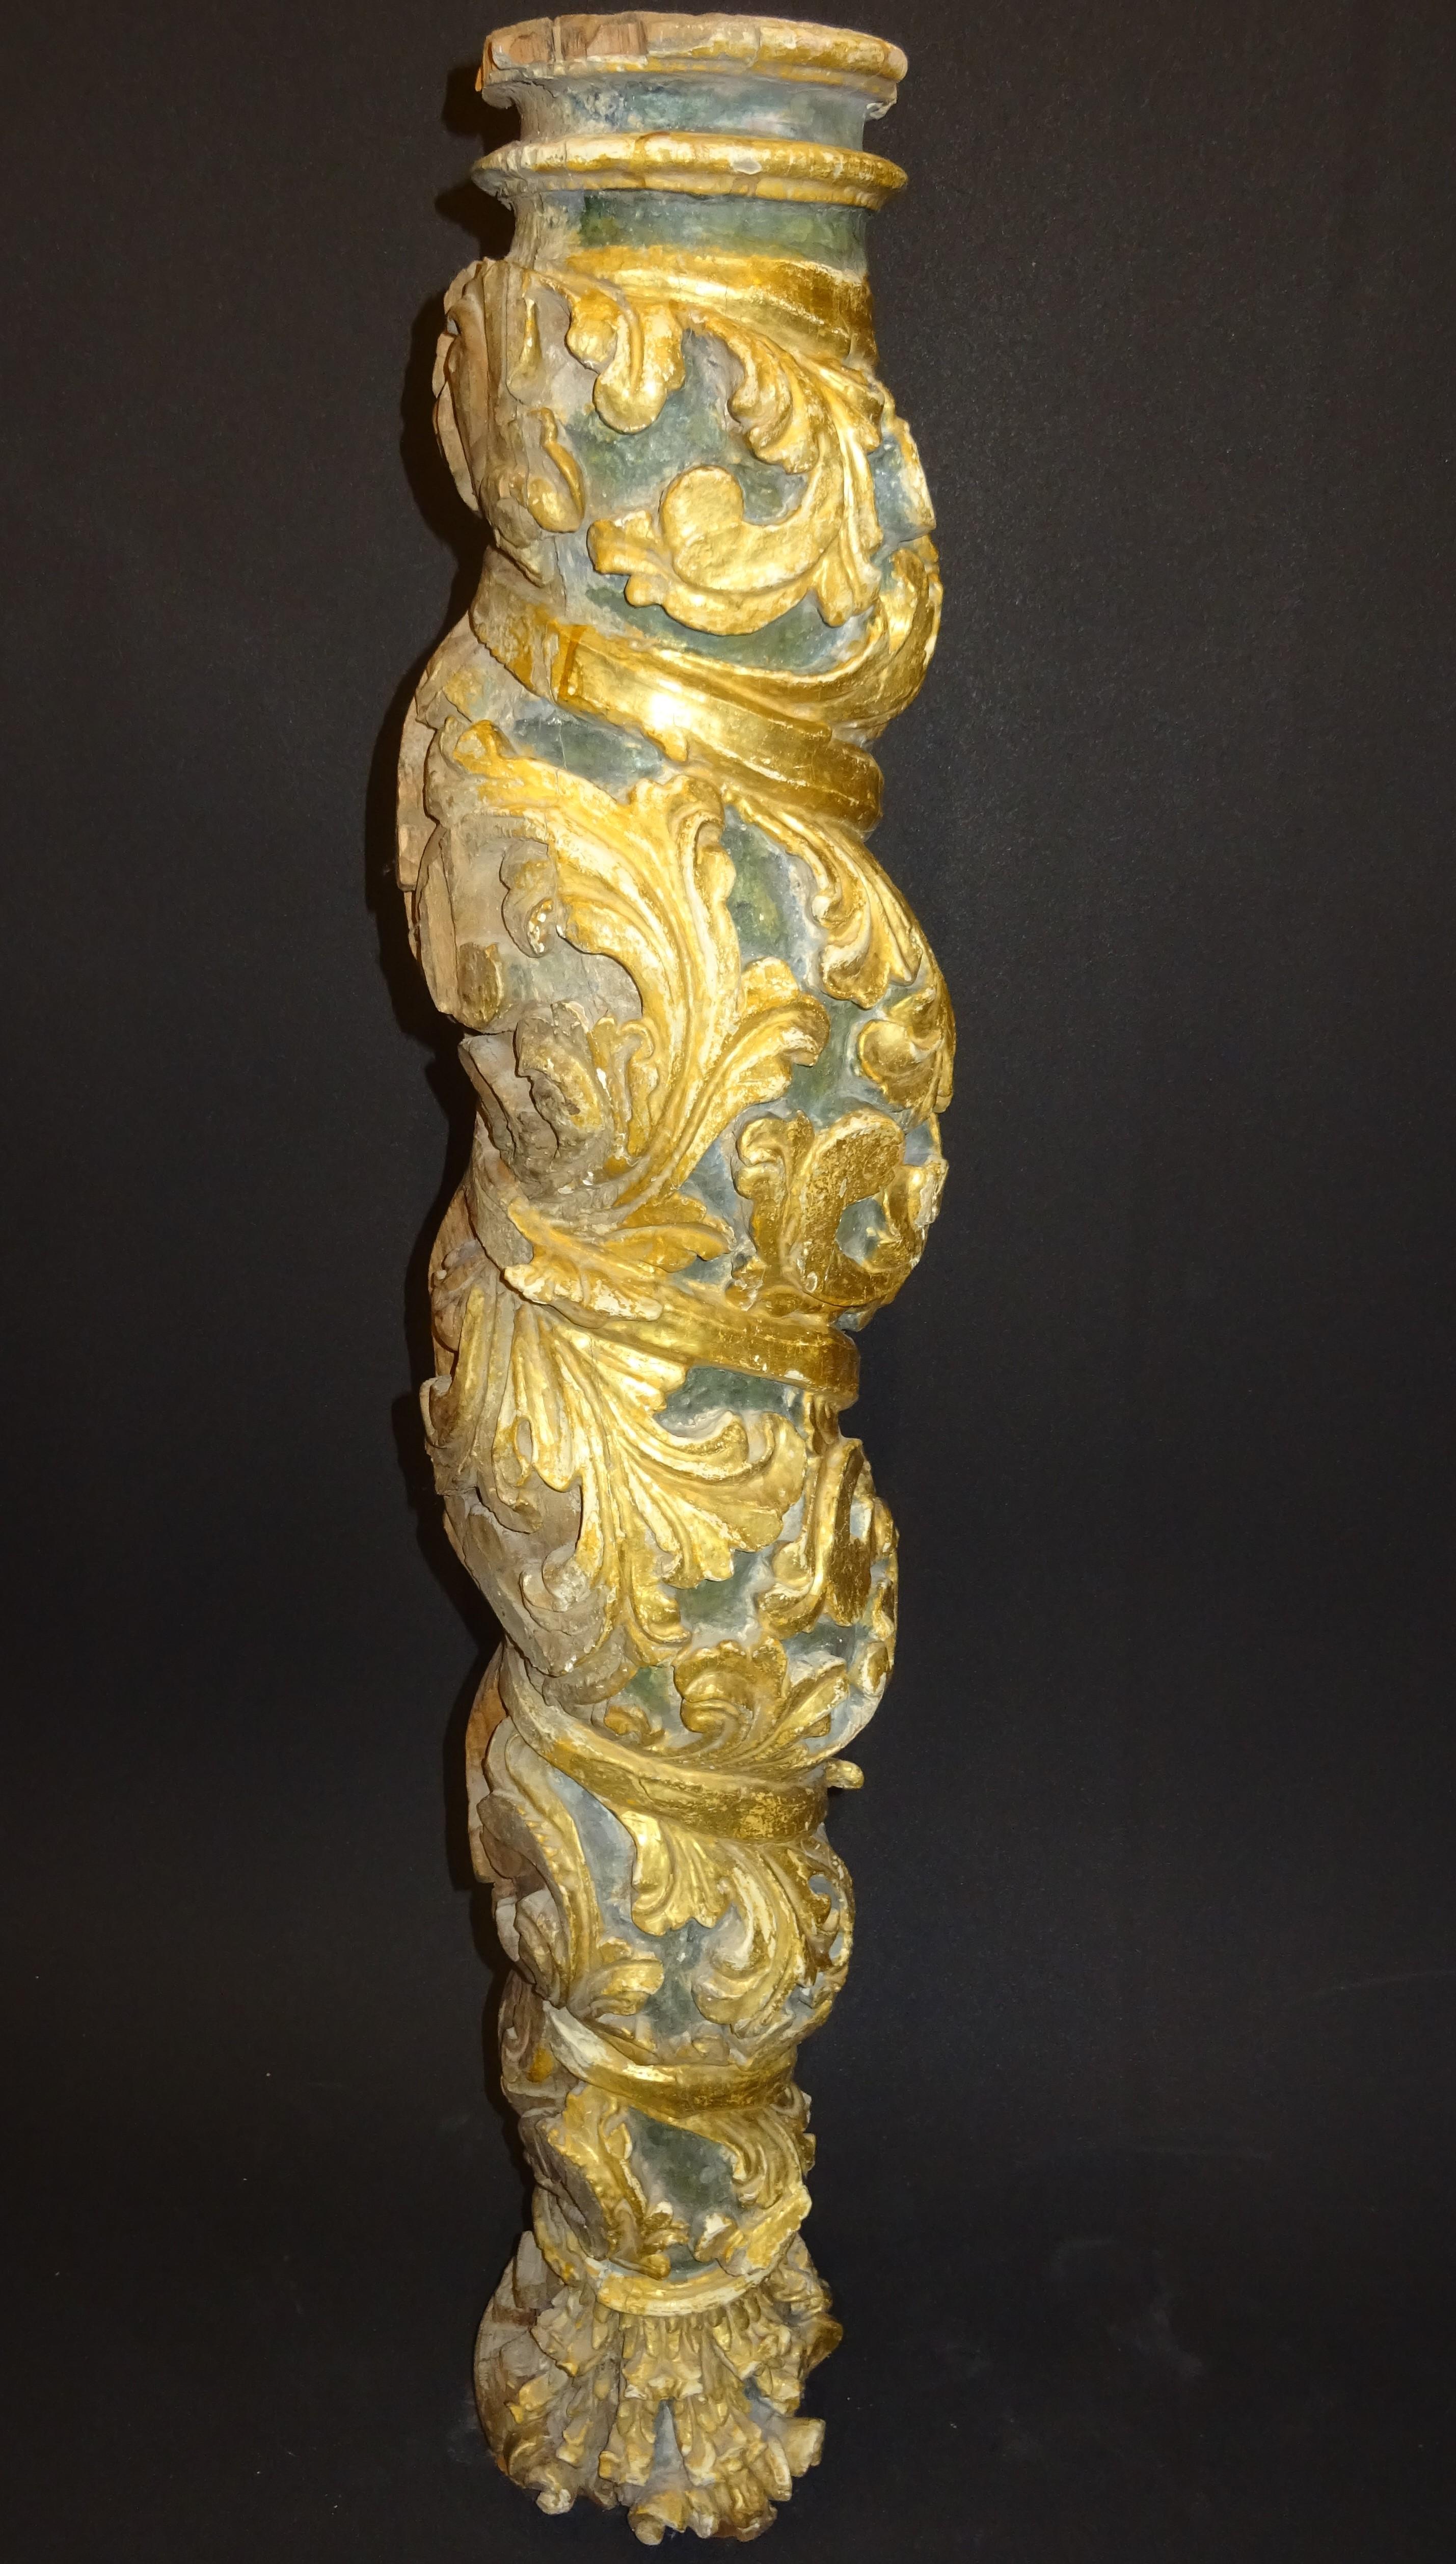 One of a kind Spanish Baroque Salomonic gold, polychrome and carved wood.
It’s a stunning piece for a art collector o gorgeous interiors, it is suitable to give a touch with character and exquisiteness to any interior.
It was purchased in a